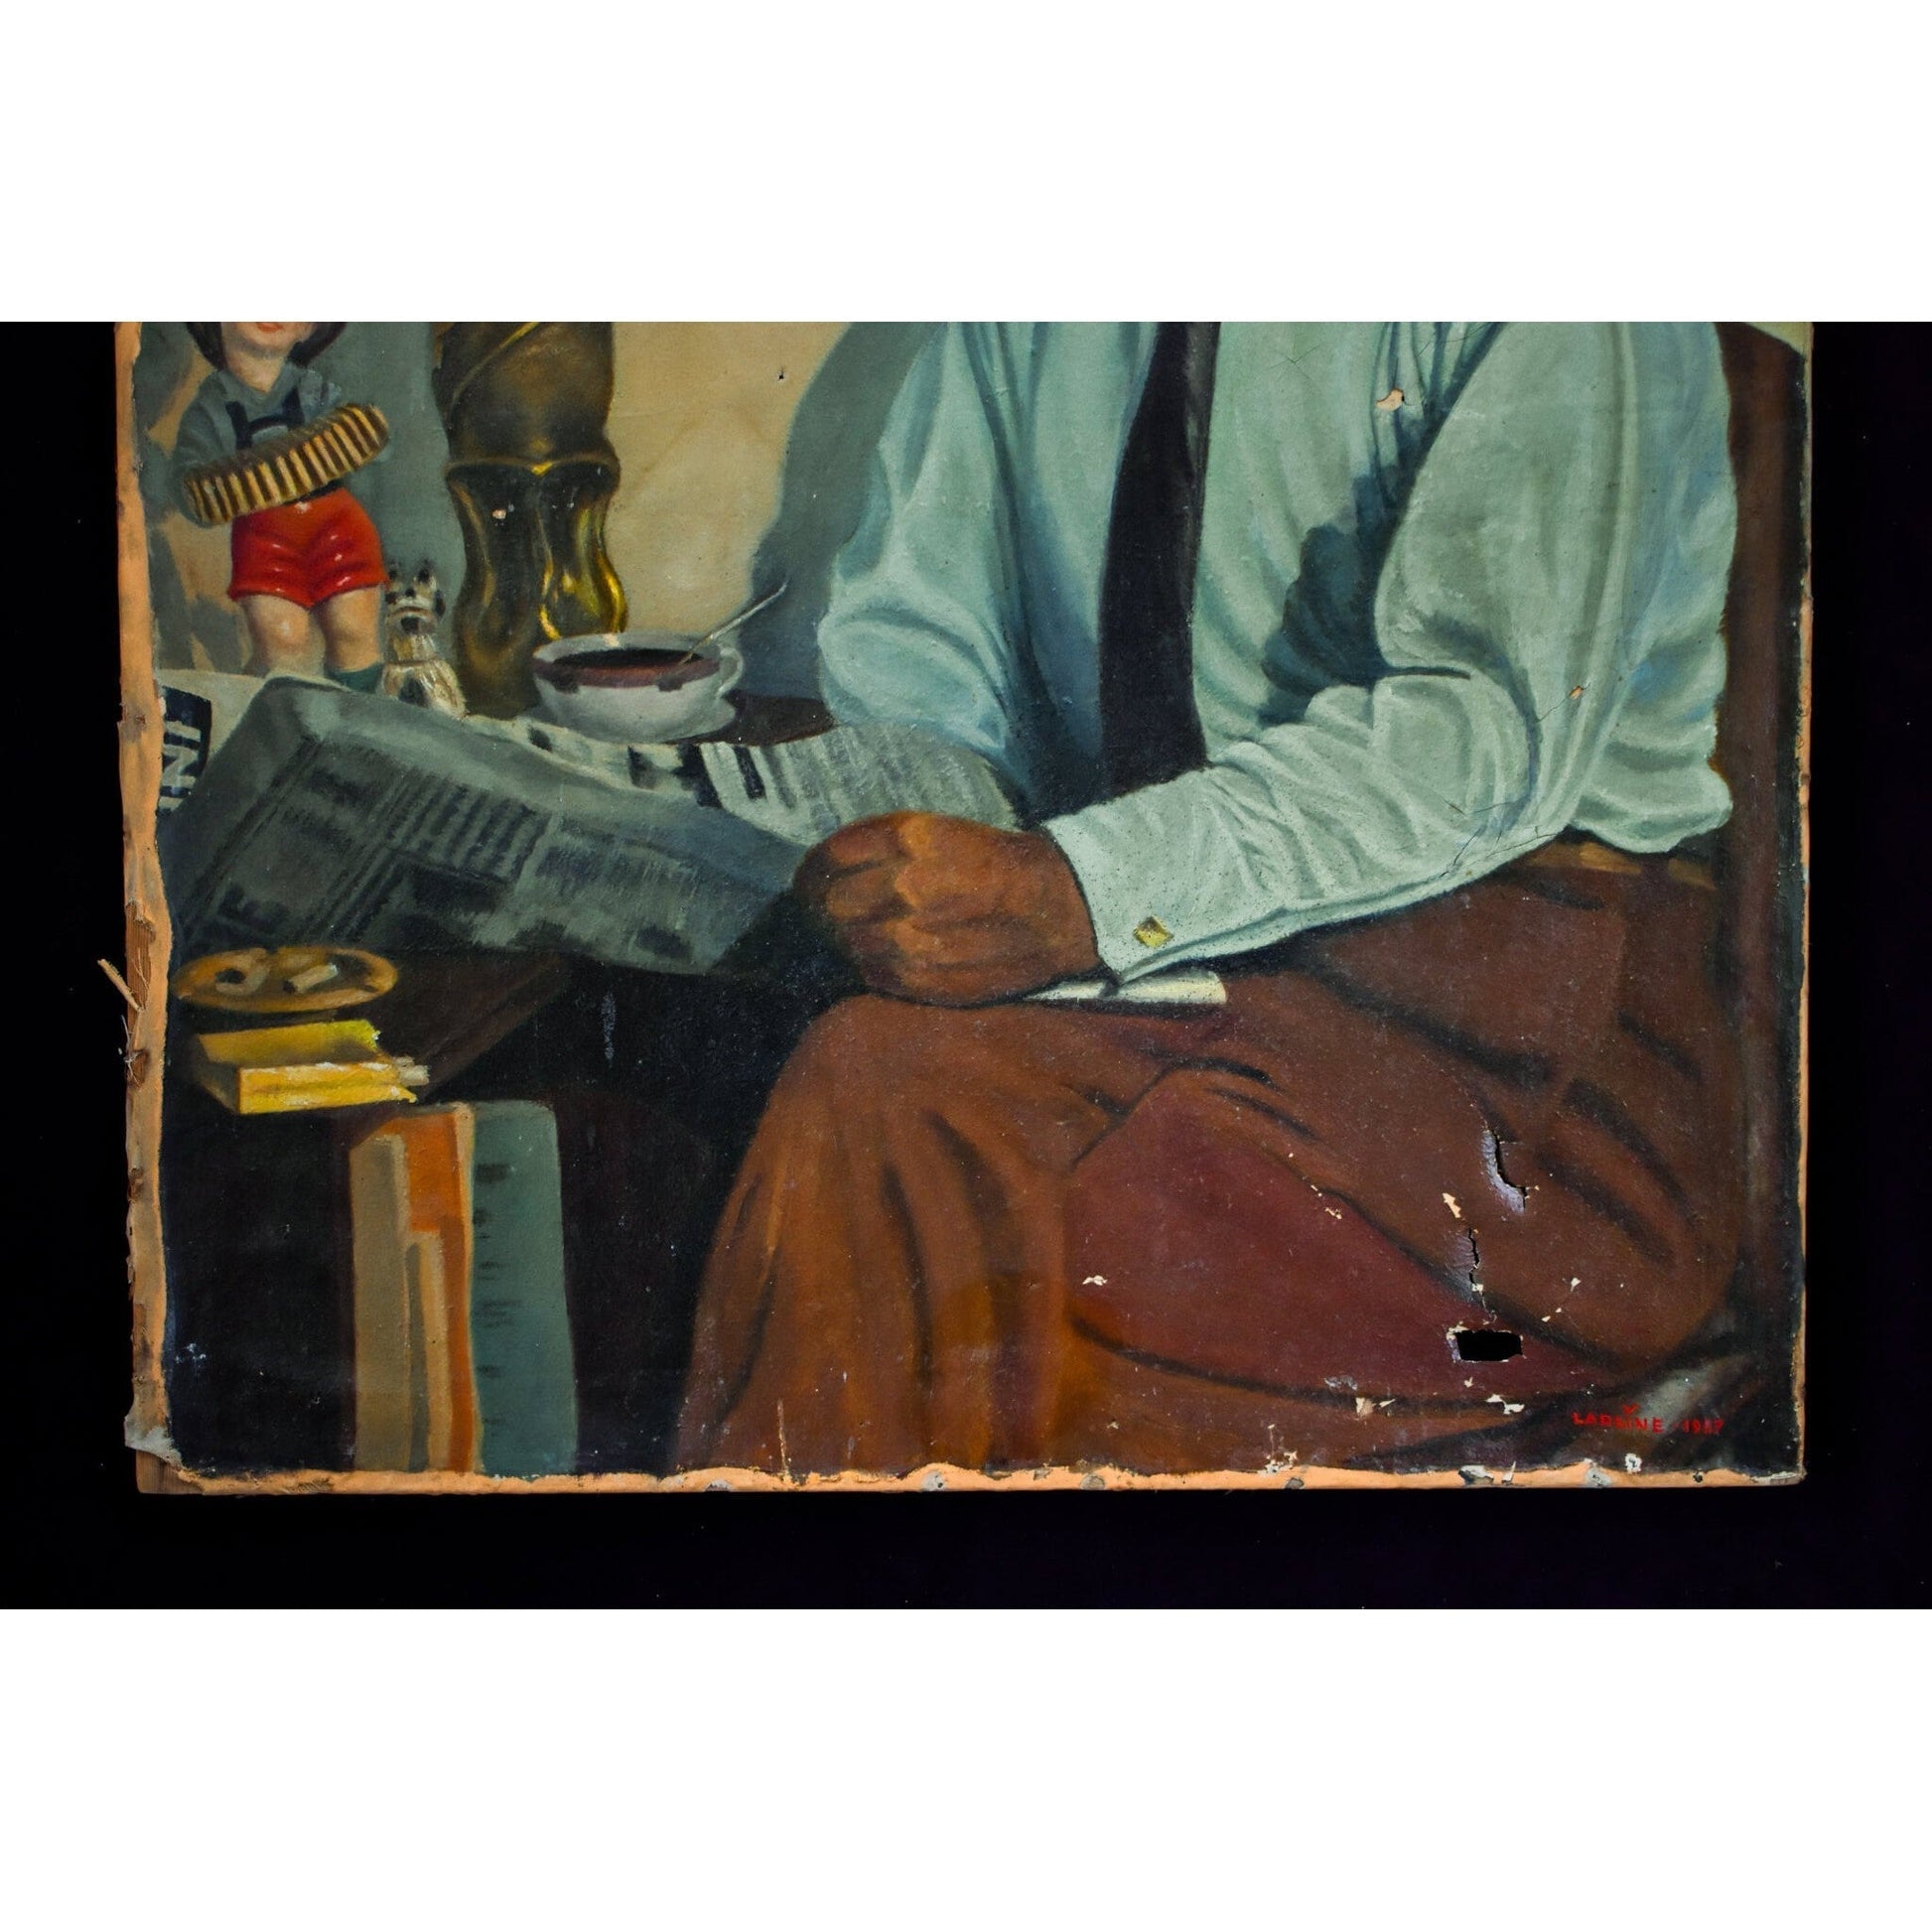 Vintage genre oil painting, interior scene with a man reading a newspaper, to be restored, for sale at Winckelmann Gallery.